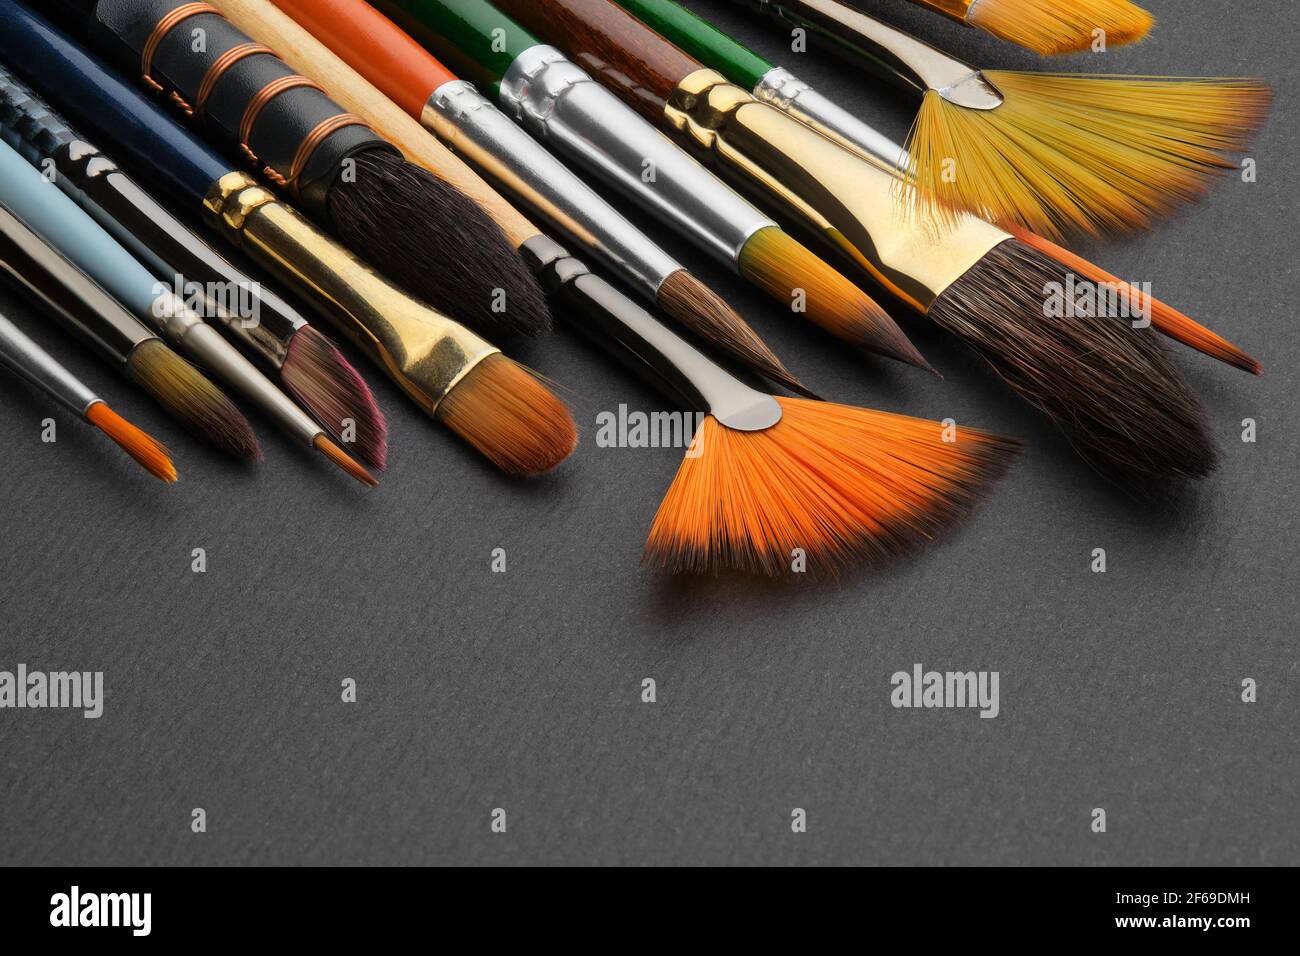 Artistic paintbrush for watercolor painting closeup. Different shape and size paint brushes on black paper background. Set of brushes for painting. Stock Photo